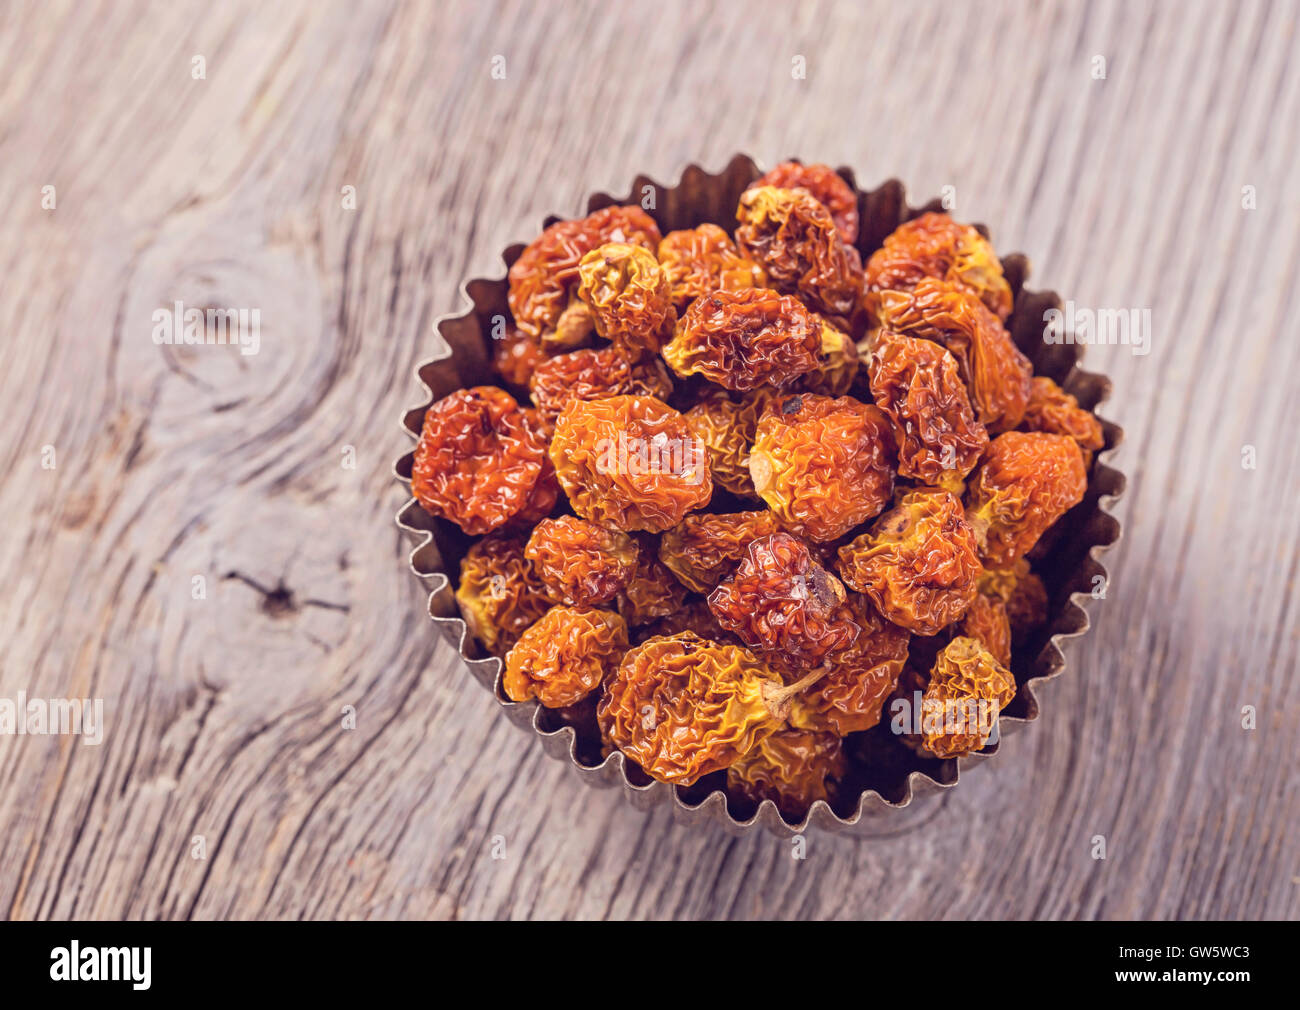 Physalis berries in a bowl on a wooden background Stock Photo